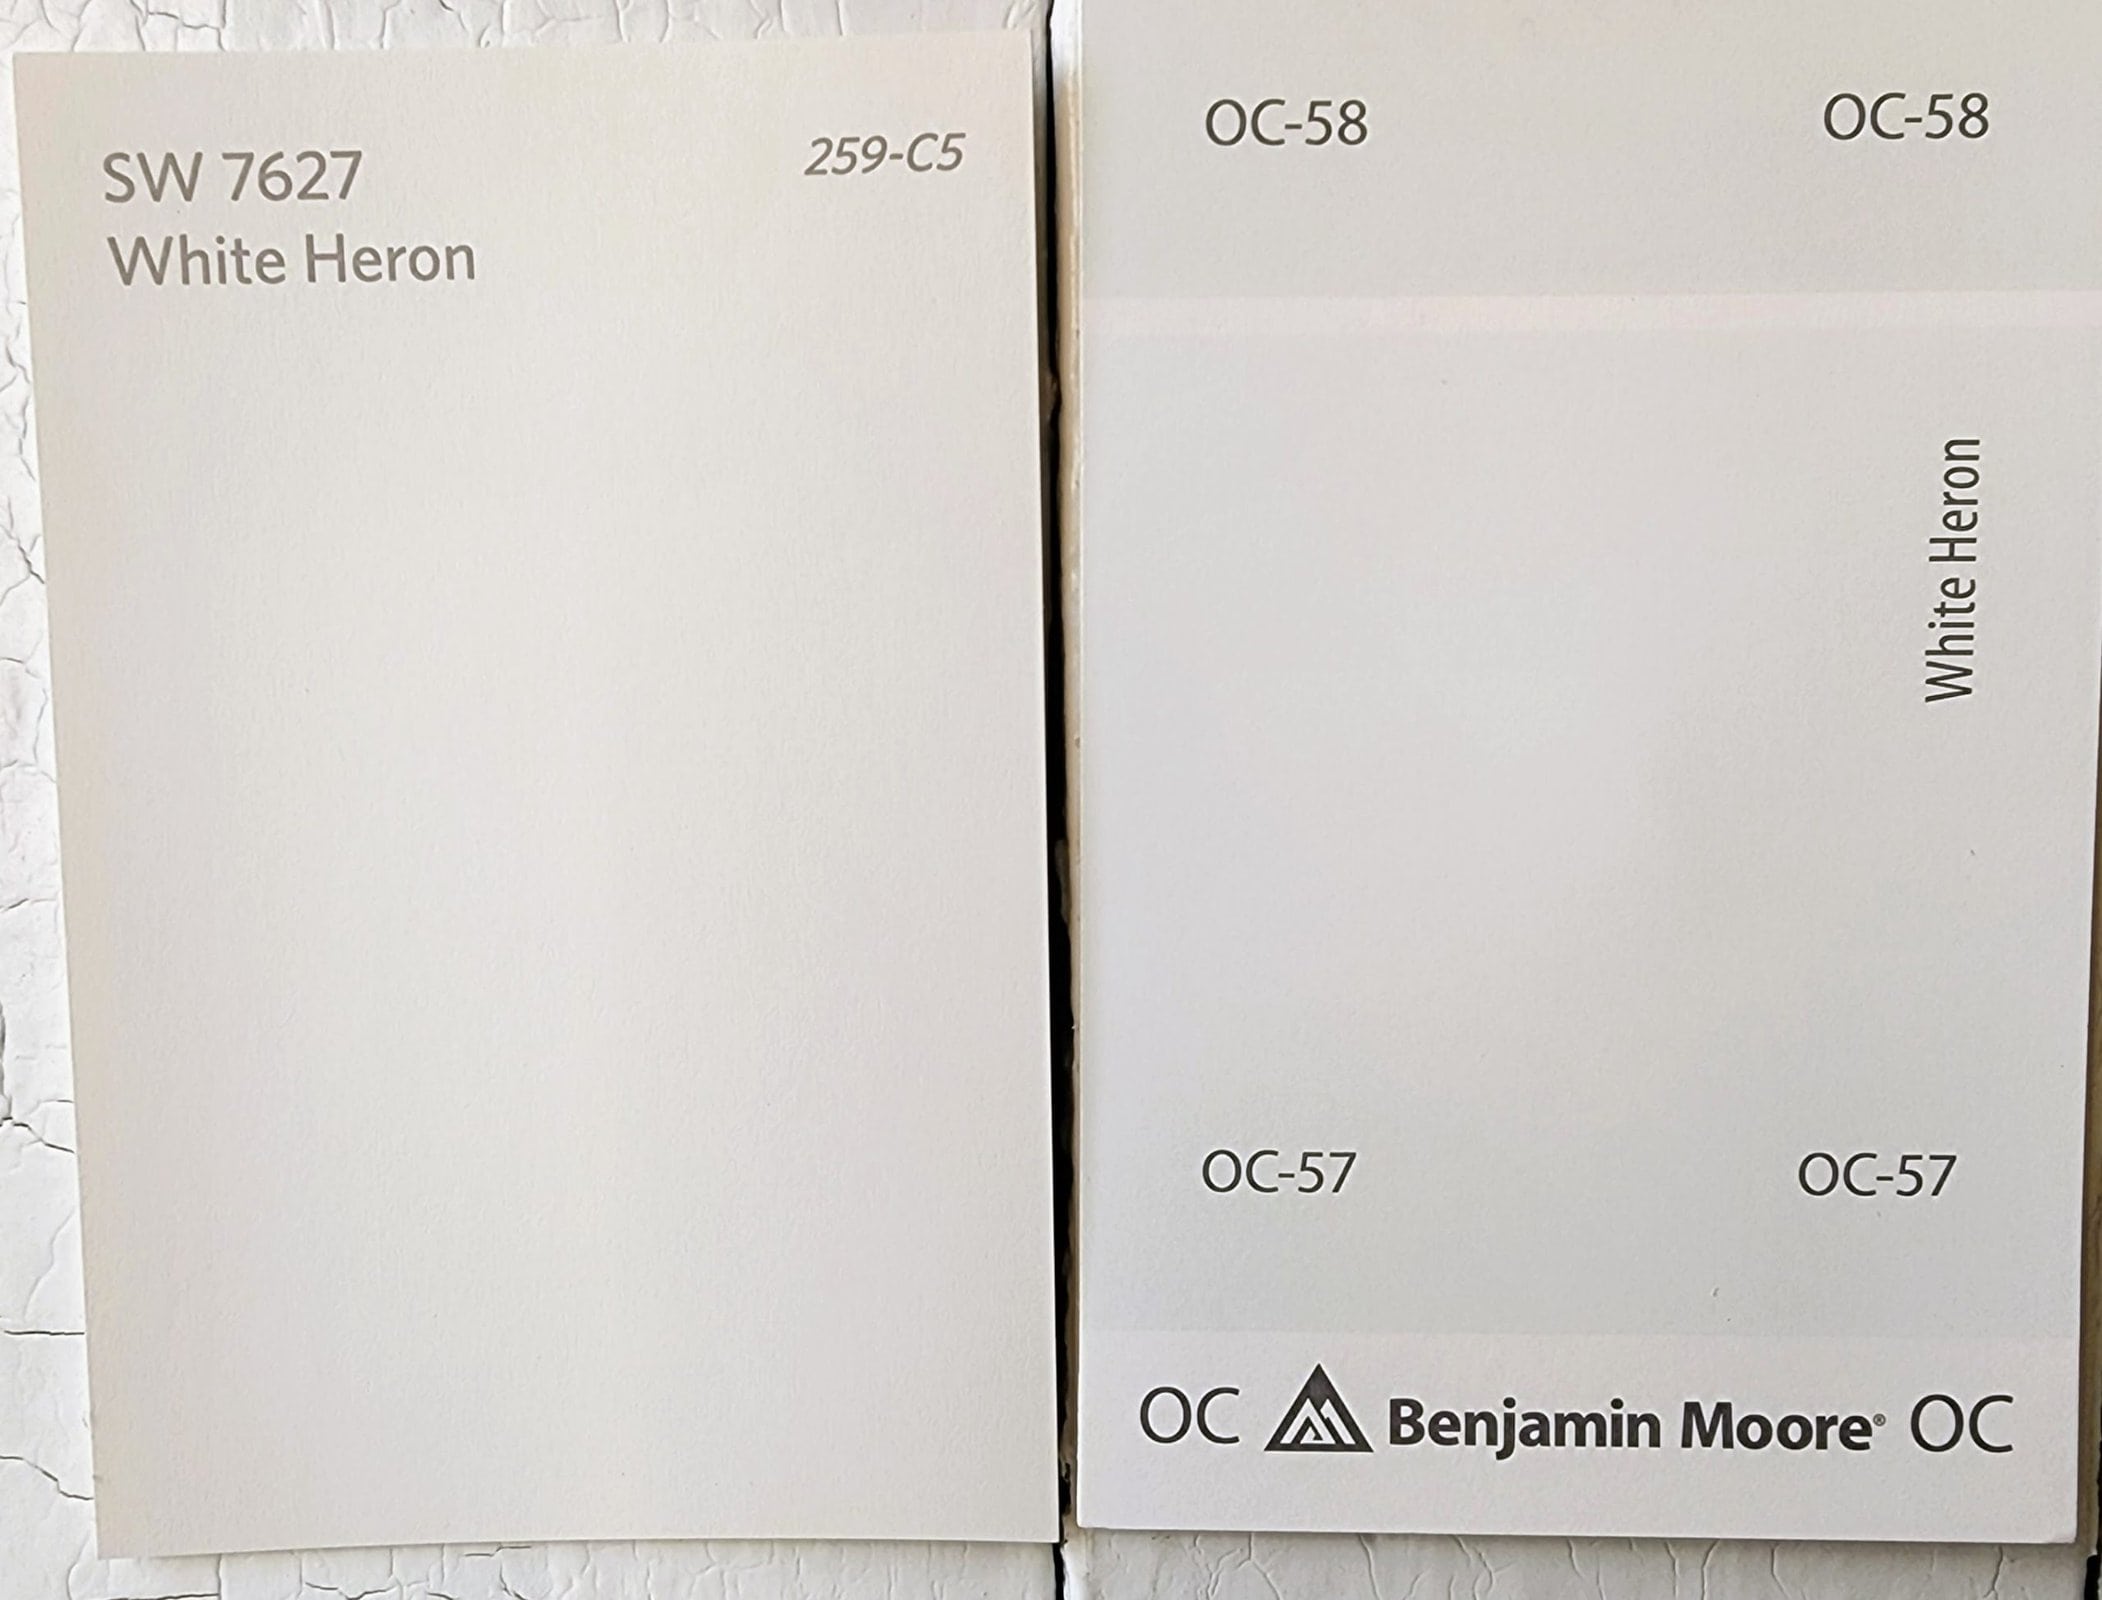  White Heron by Sherwin Wiilliams vs White Heron by Benjamin Moore scaled